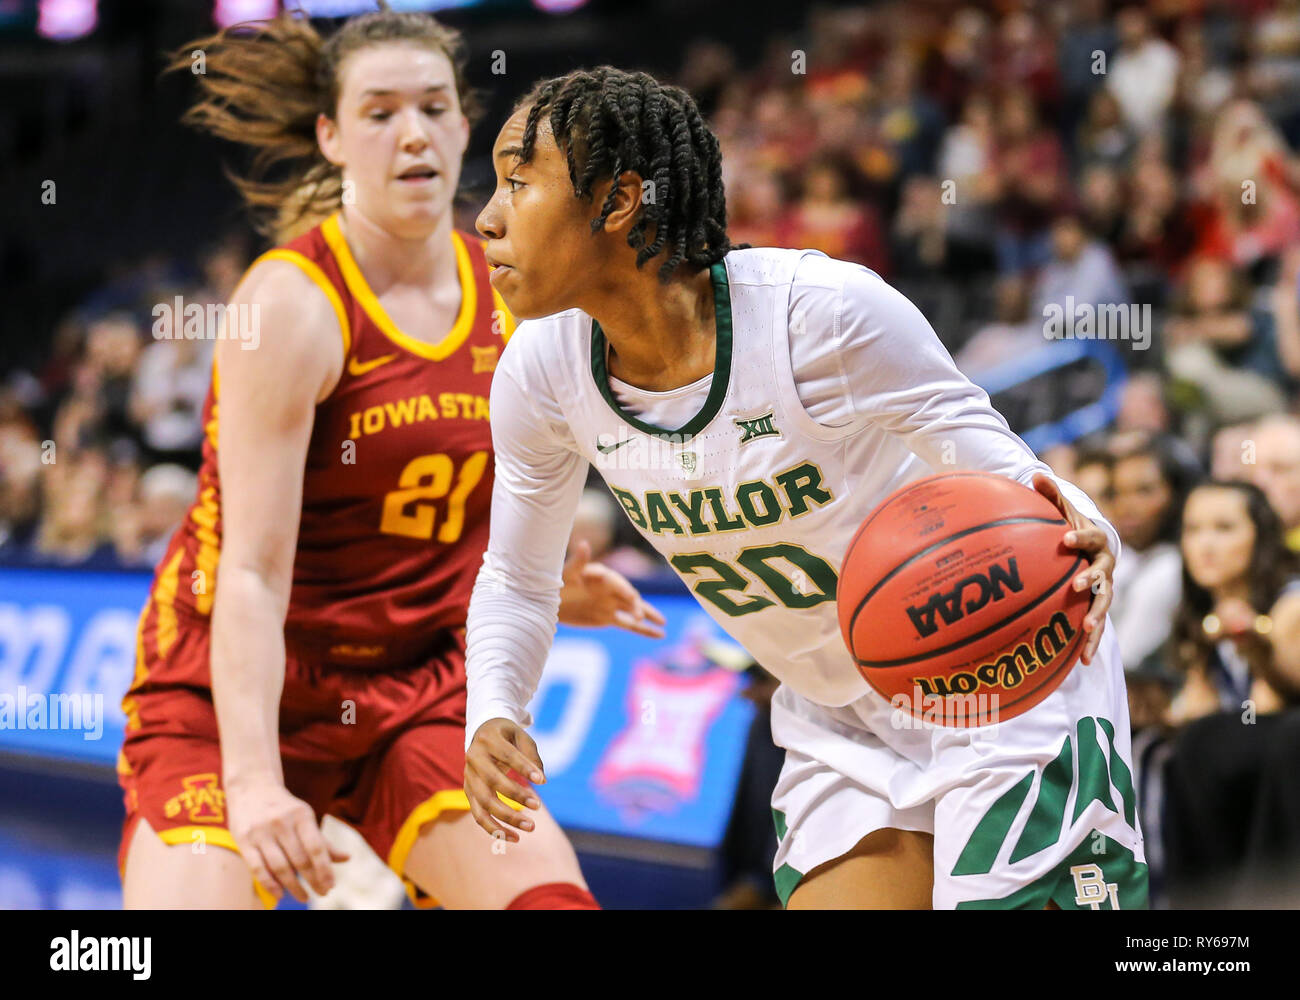 Oklahoma City, OK, USA. 11th Mar, 2019. Baylor Guard Juicy Landrum (20) drives with the ball during the Phillips 66 Big 12 Womens Basketball Championship Final game between the Baylor Lady Bears and the Iowa State Cyclones at Chesapeake Energy Arena in Oklahoma City, OK. Gray Siegel/CSM/Alamy Live News Stock Photo